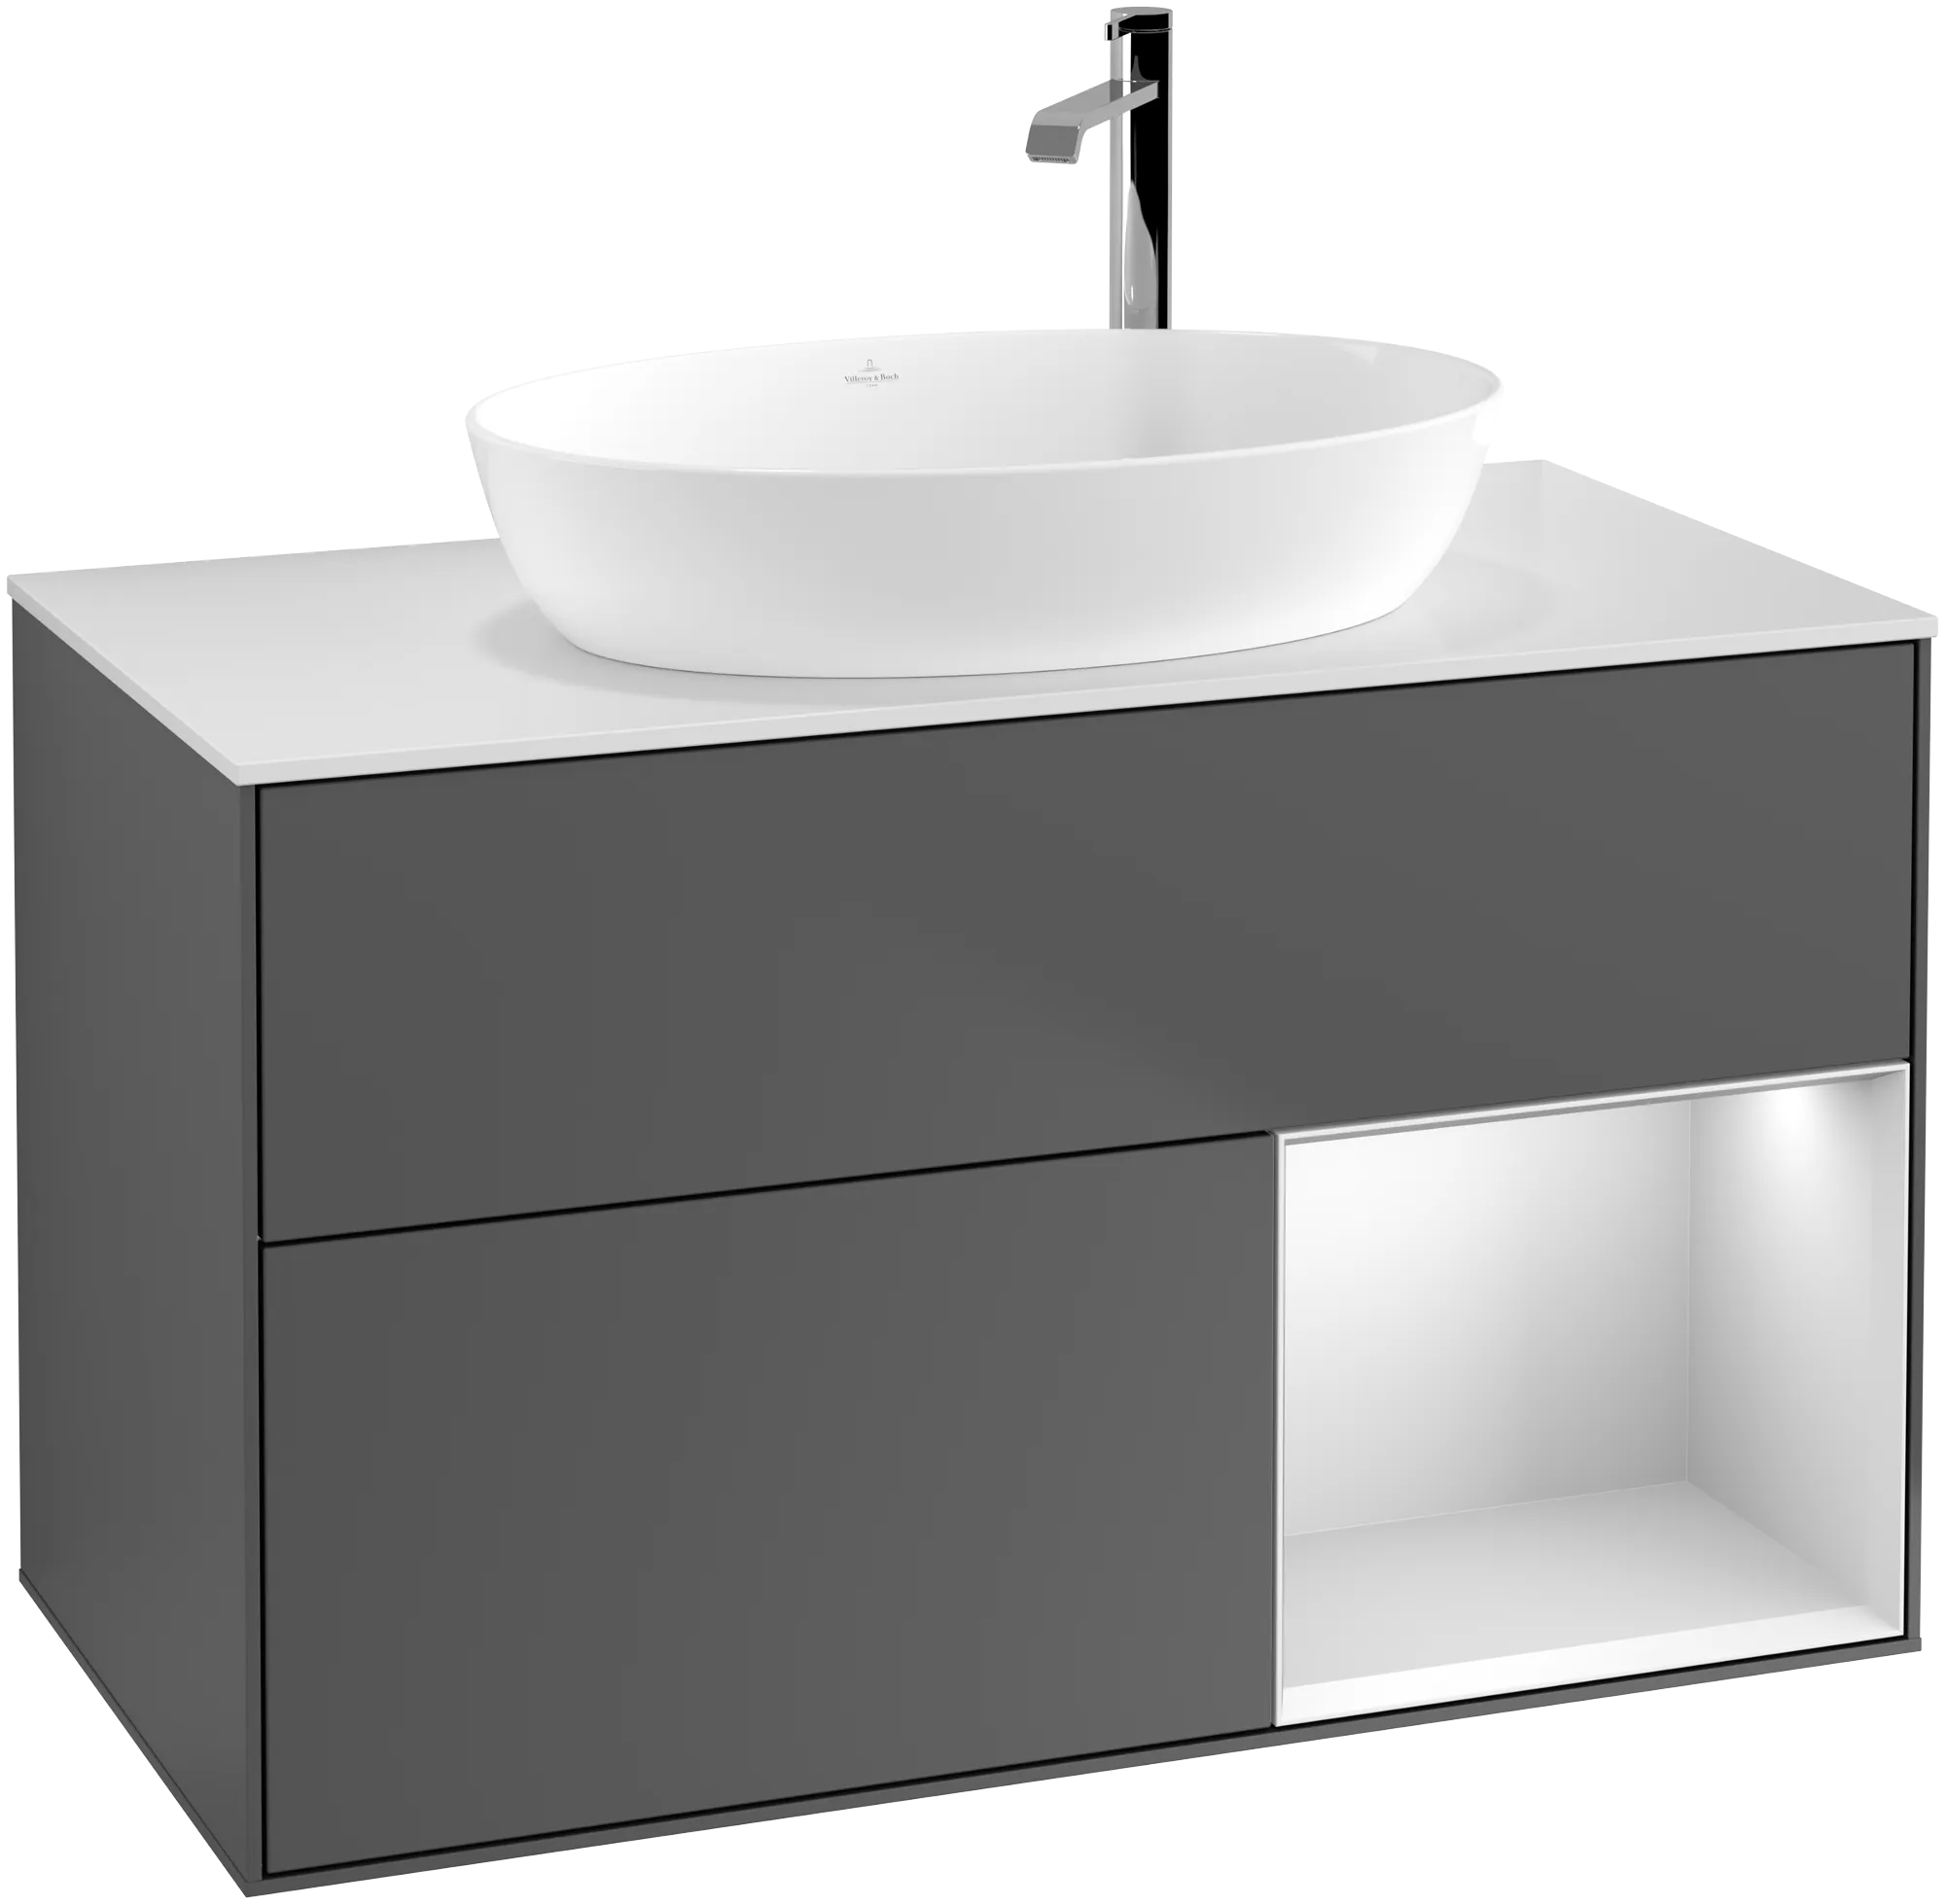 VILLEROY BOCH Finion Vanity unit, with lighting, 2 pull-out compartments, 1000 x 603 x 501 mm, Anthracite Matt Lacquer / White Matt Lacquer / Glass White Matt #G901MTGK resmi